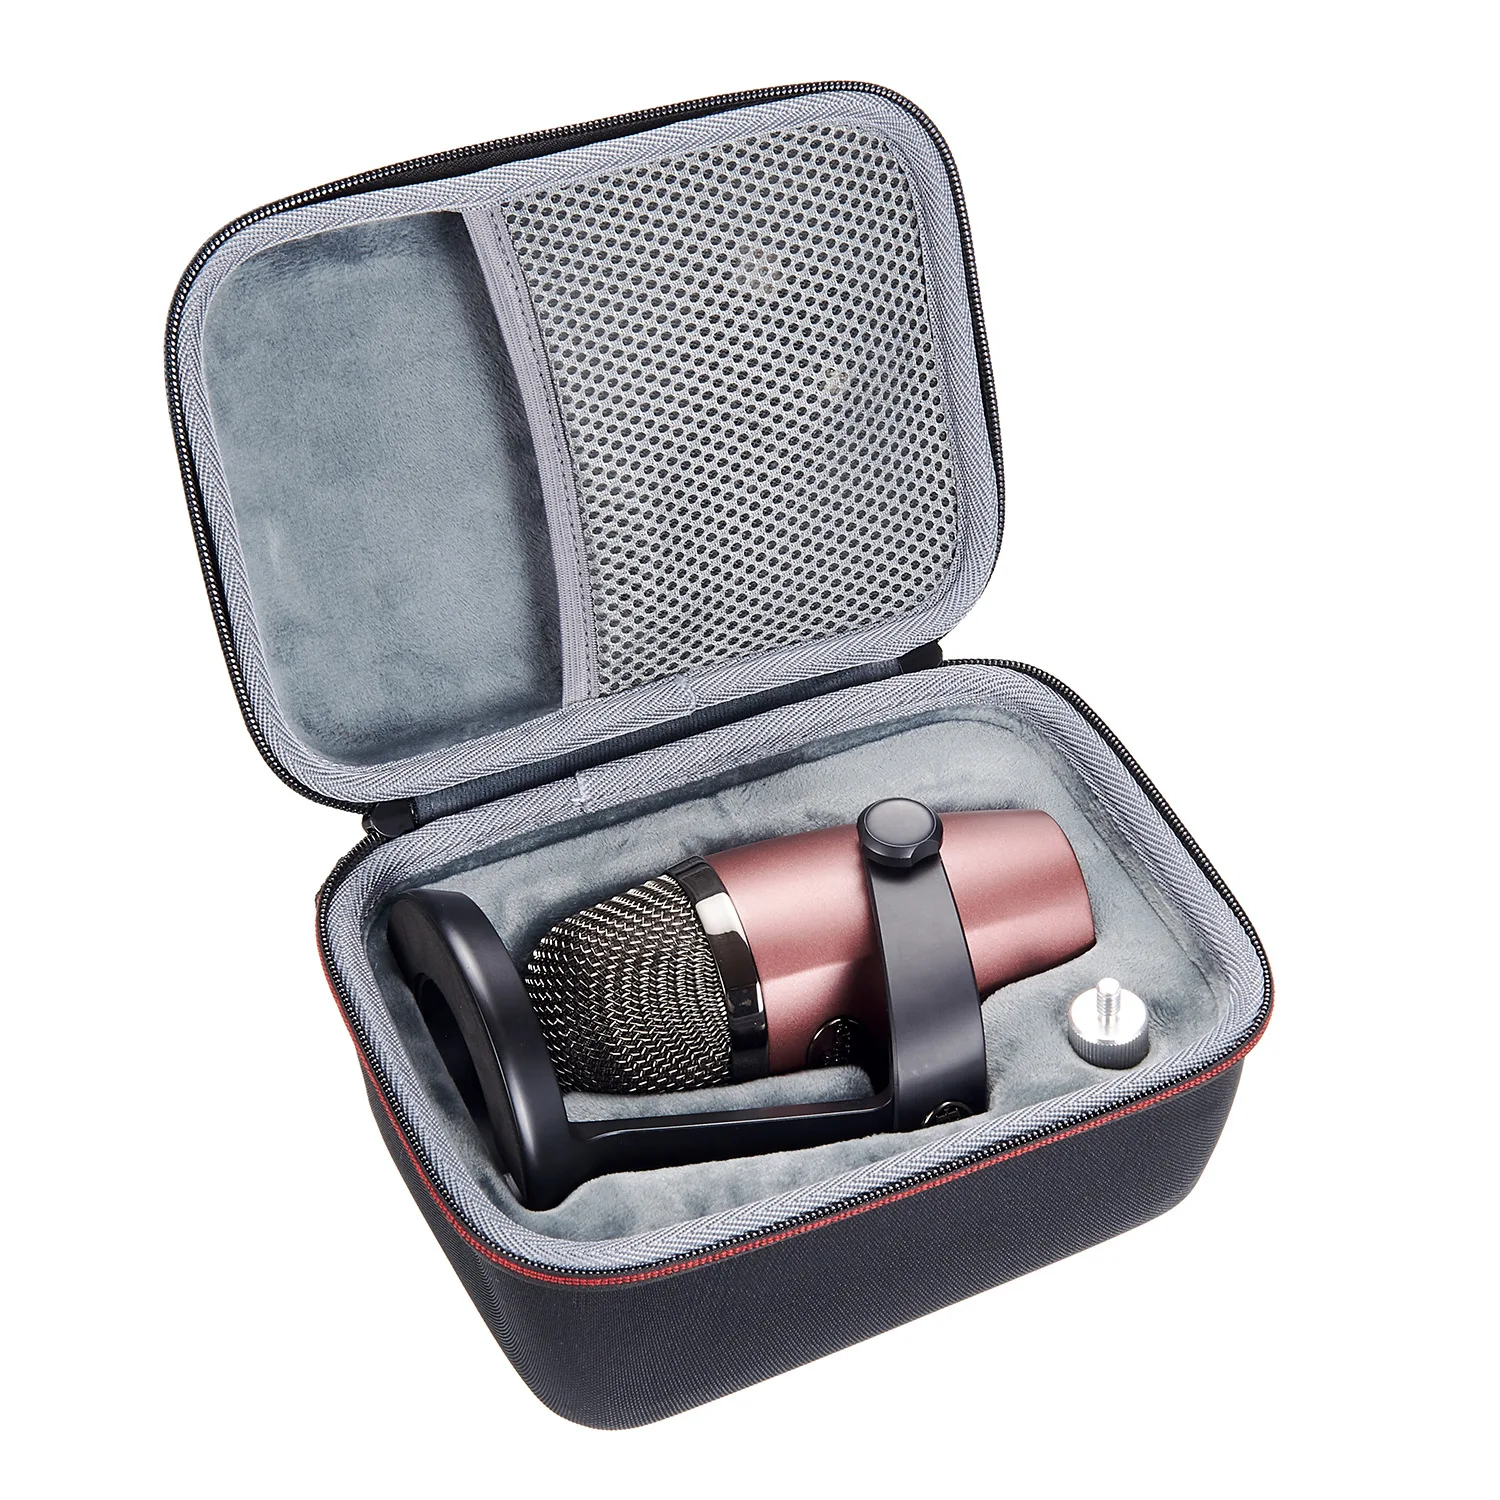 CM Hard Case for Blue Yeti Nano Microphone and Other USB Recording